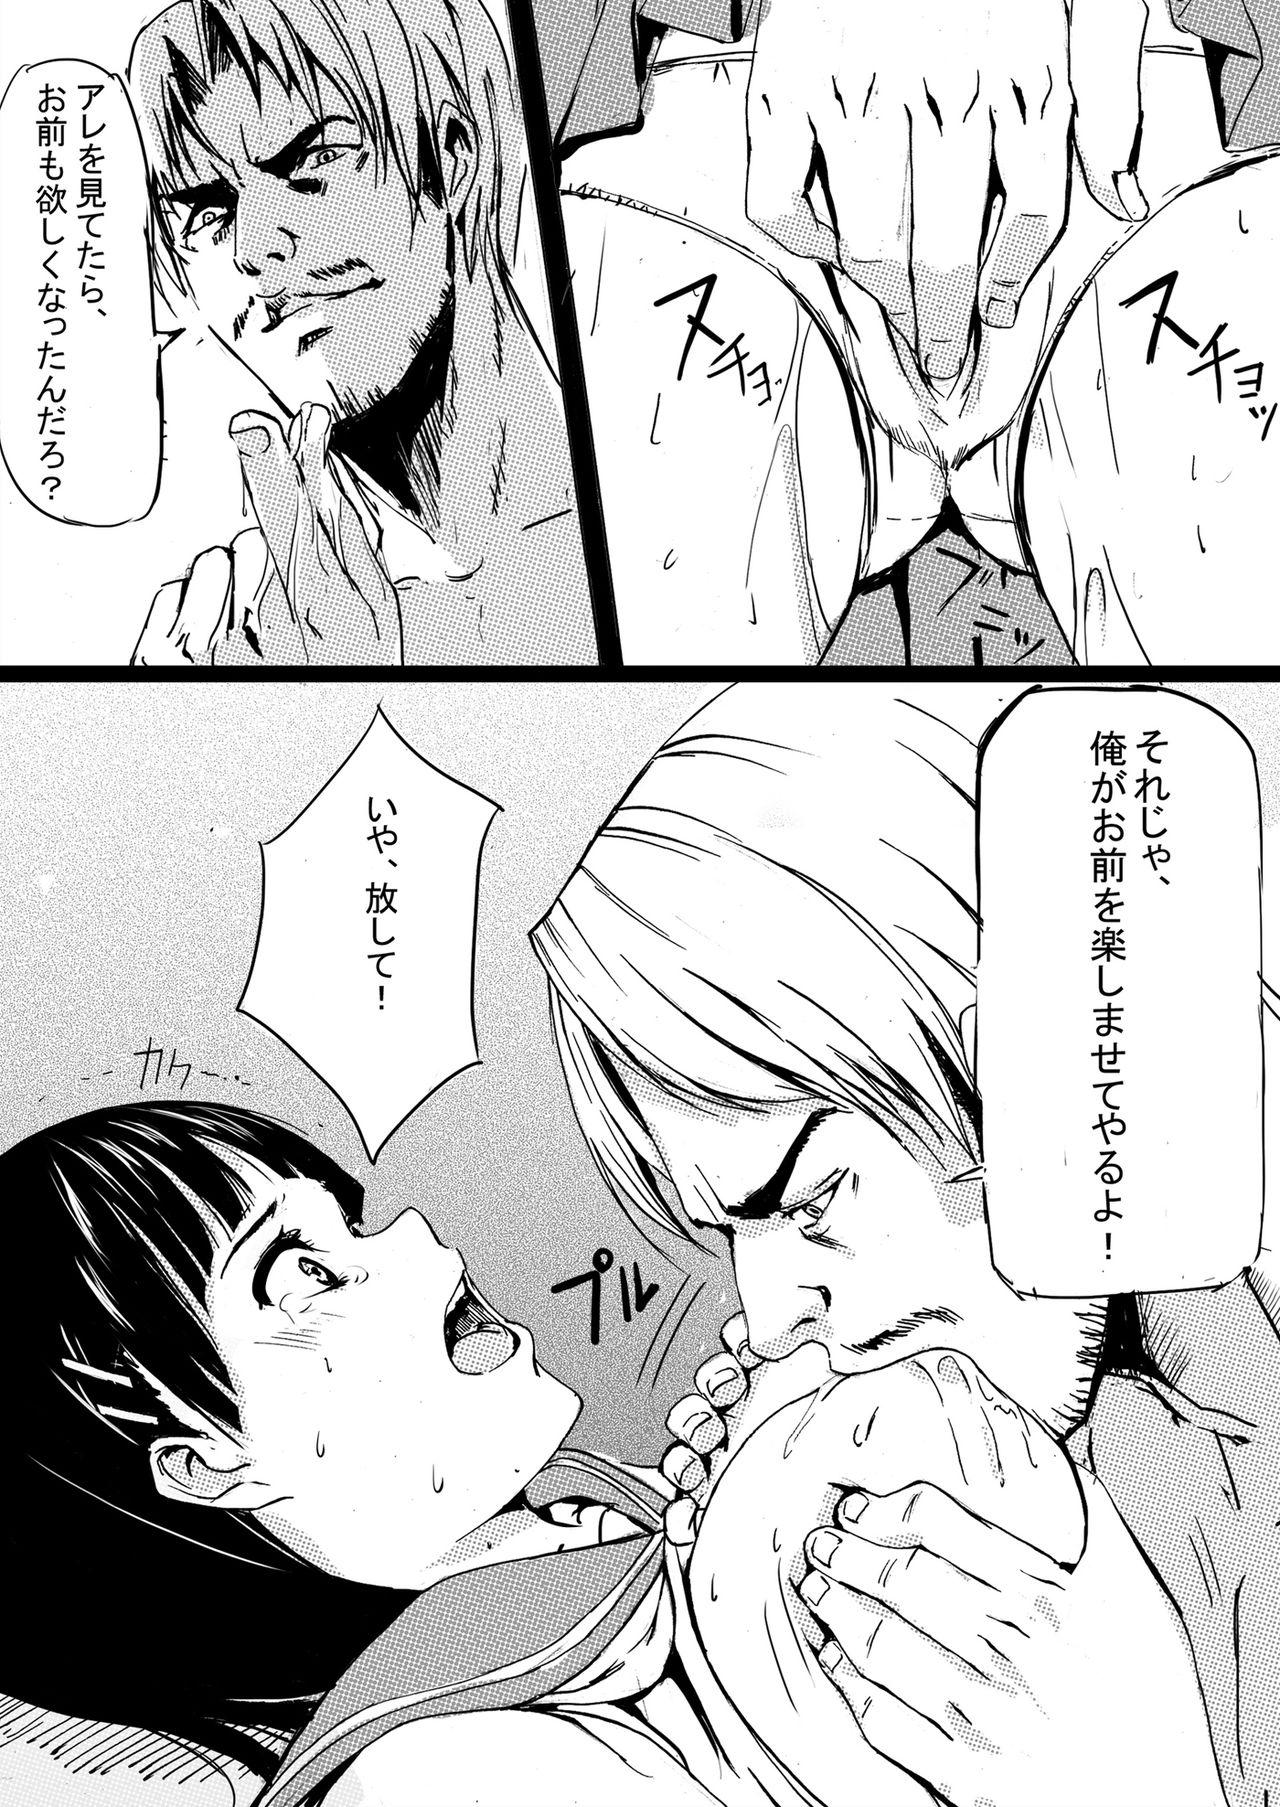 Top ゲームオーバー ○葉と明○奈の輪淫の宴 - Sword art online Pussyeating - Page 9